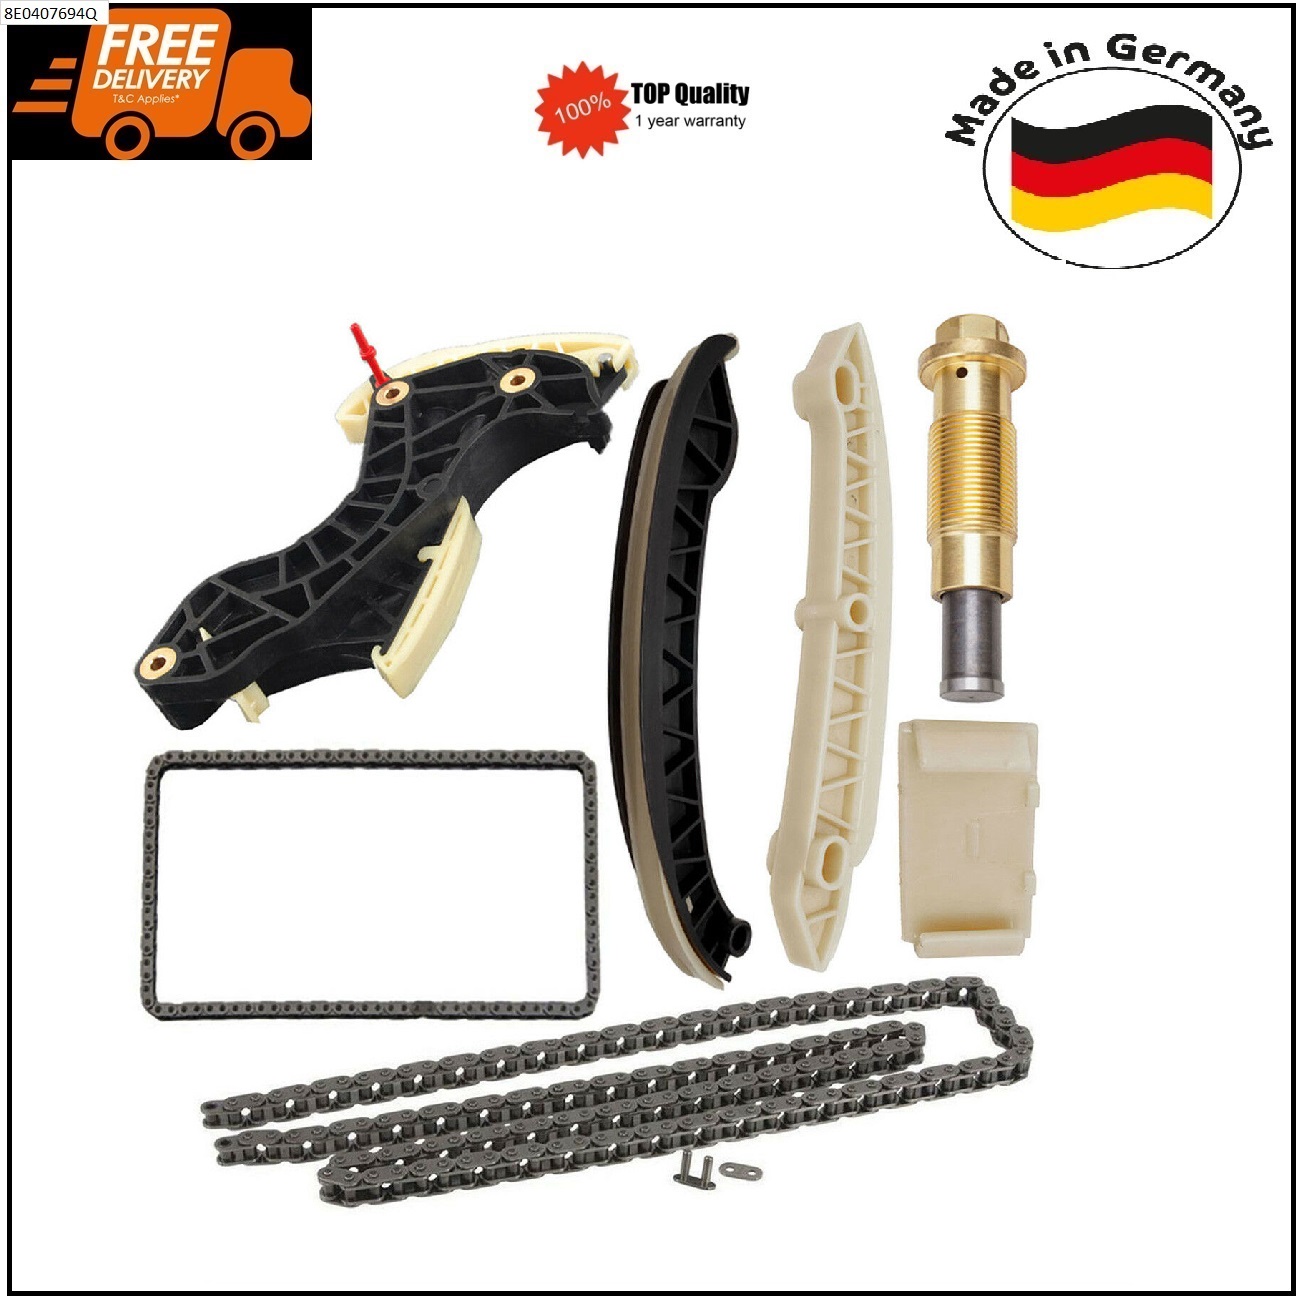 7PCS Timing Chain Kit for Mercedes C-class W203 S203 CL203 W211 A209 M271 Engine German Made